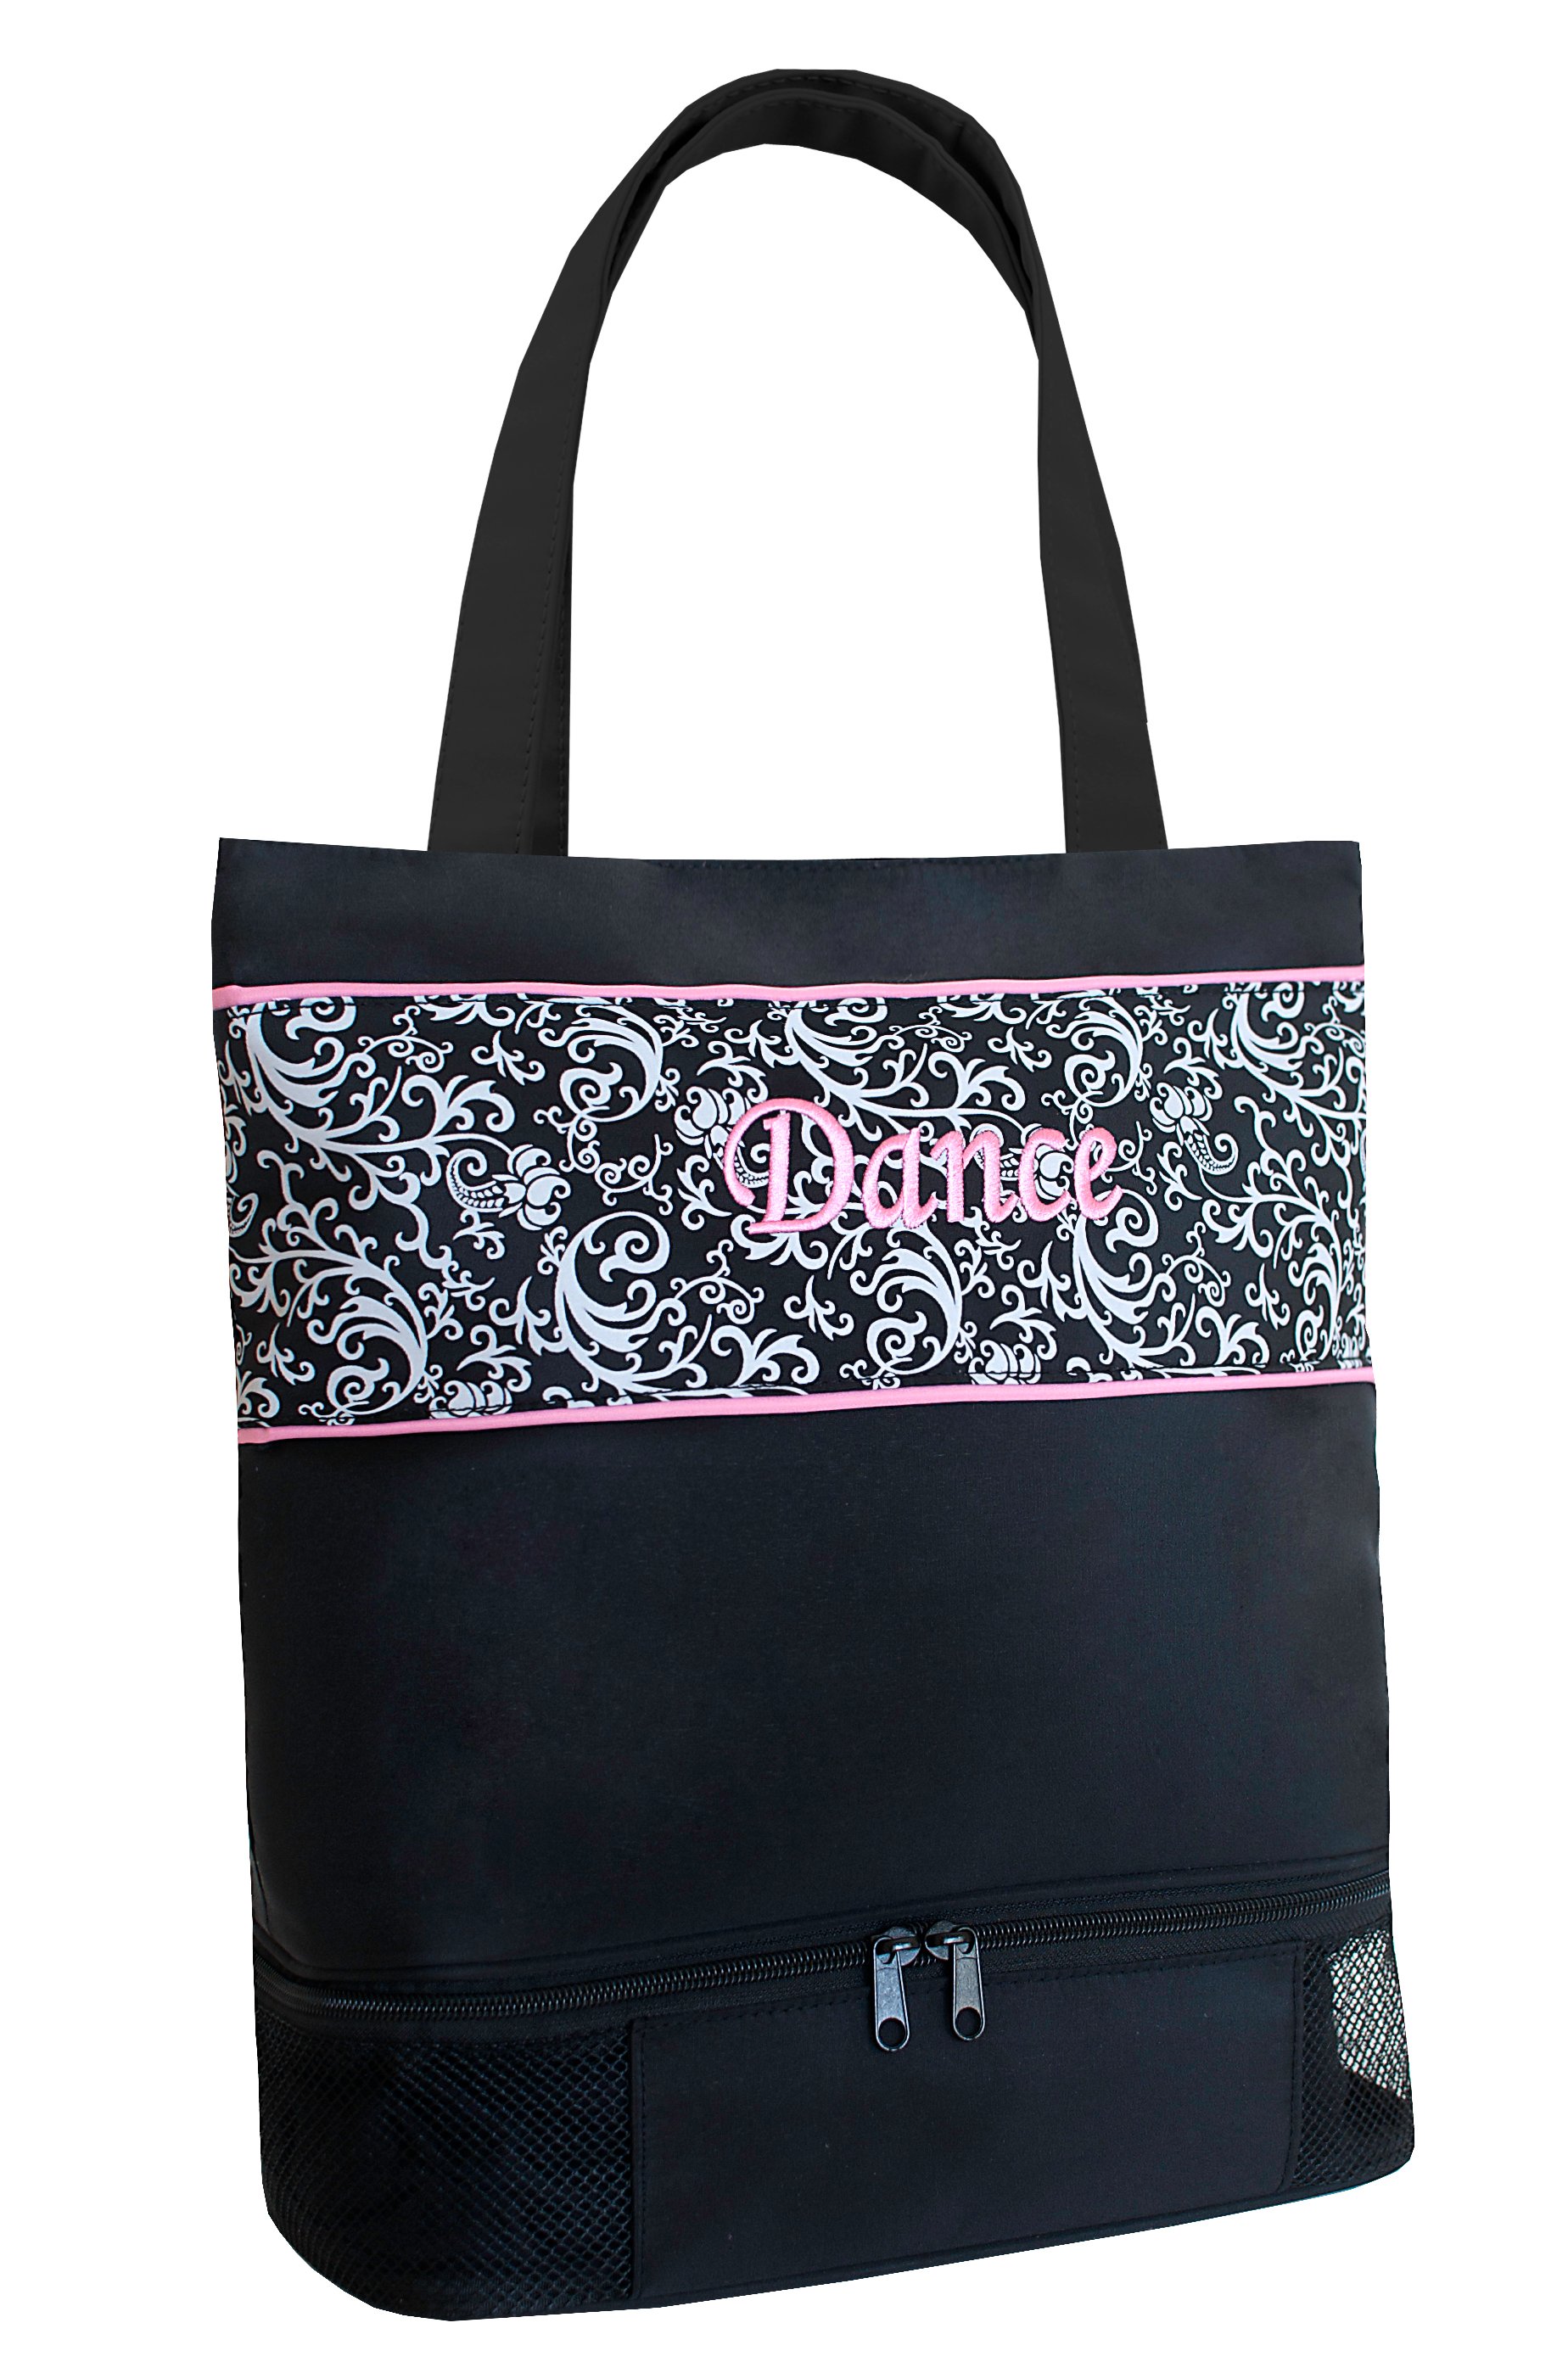 Dsk-02 Damask Tote Bag With Shoe Compartment - Medium